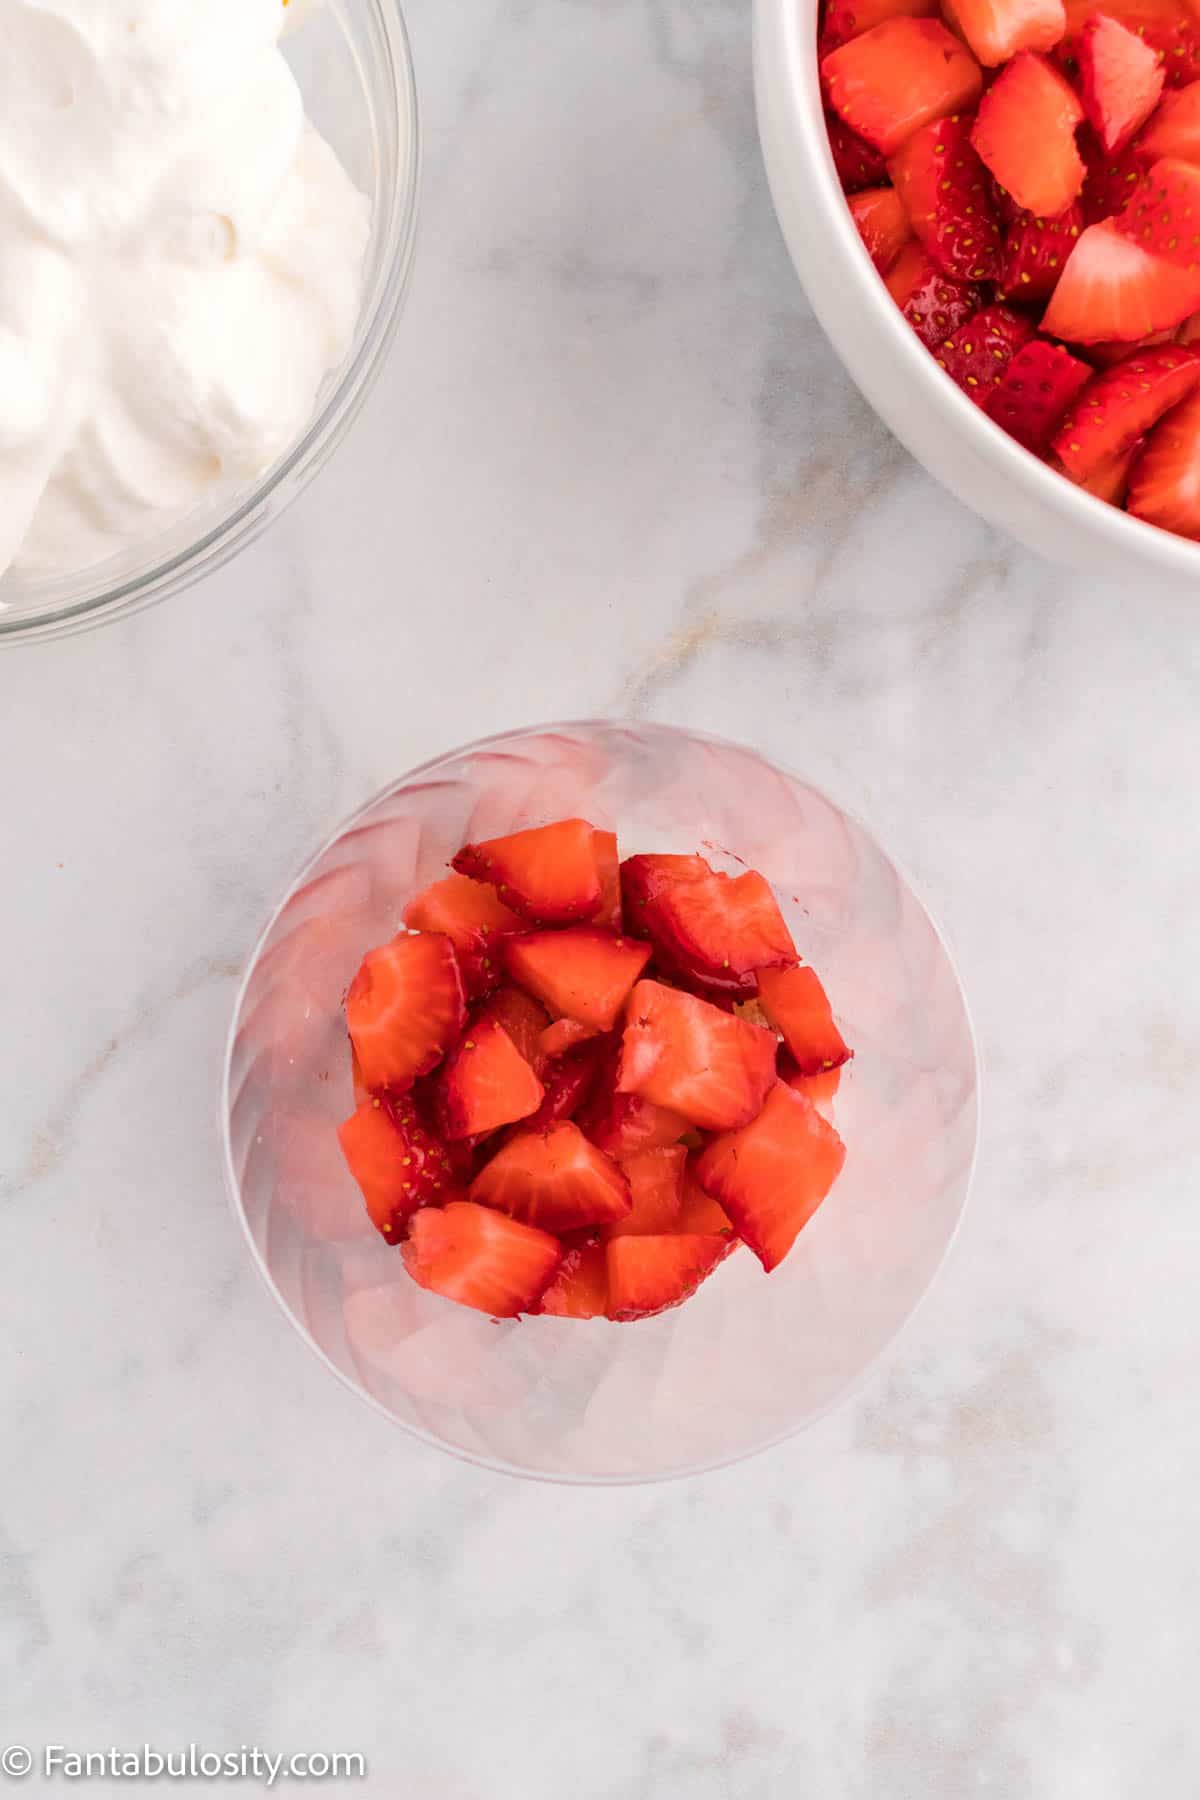 A layer of chopped strawberries in a plastic cup.